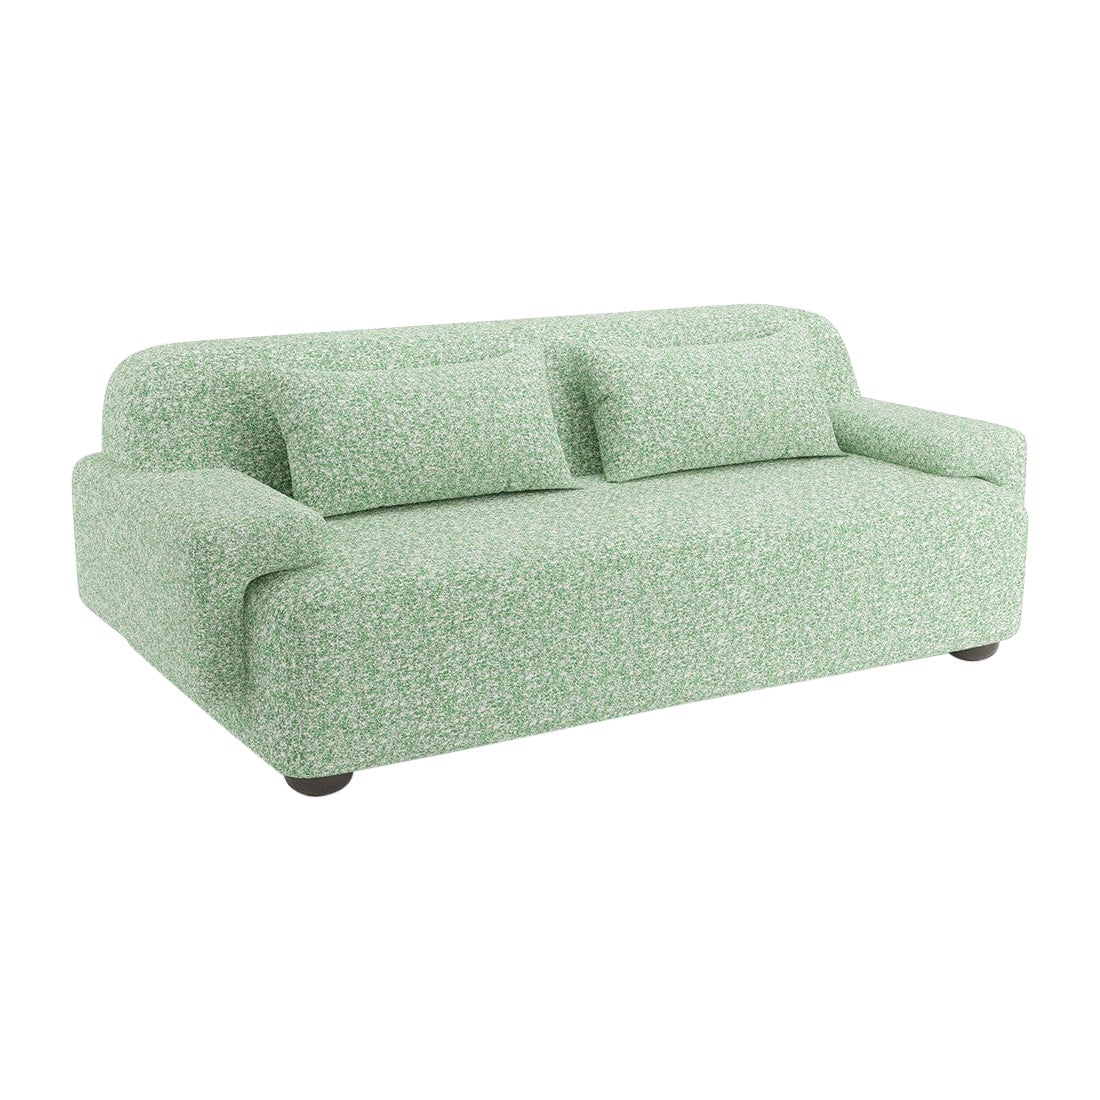 Popus Editions Lena 2.5 Seater Sofa in Grass Zanzi Linen with Wool Blend Fabric For Sale